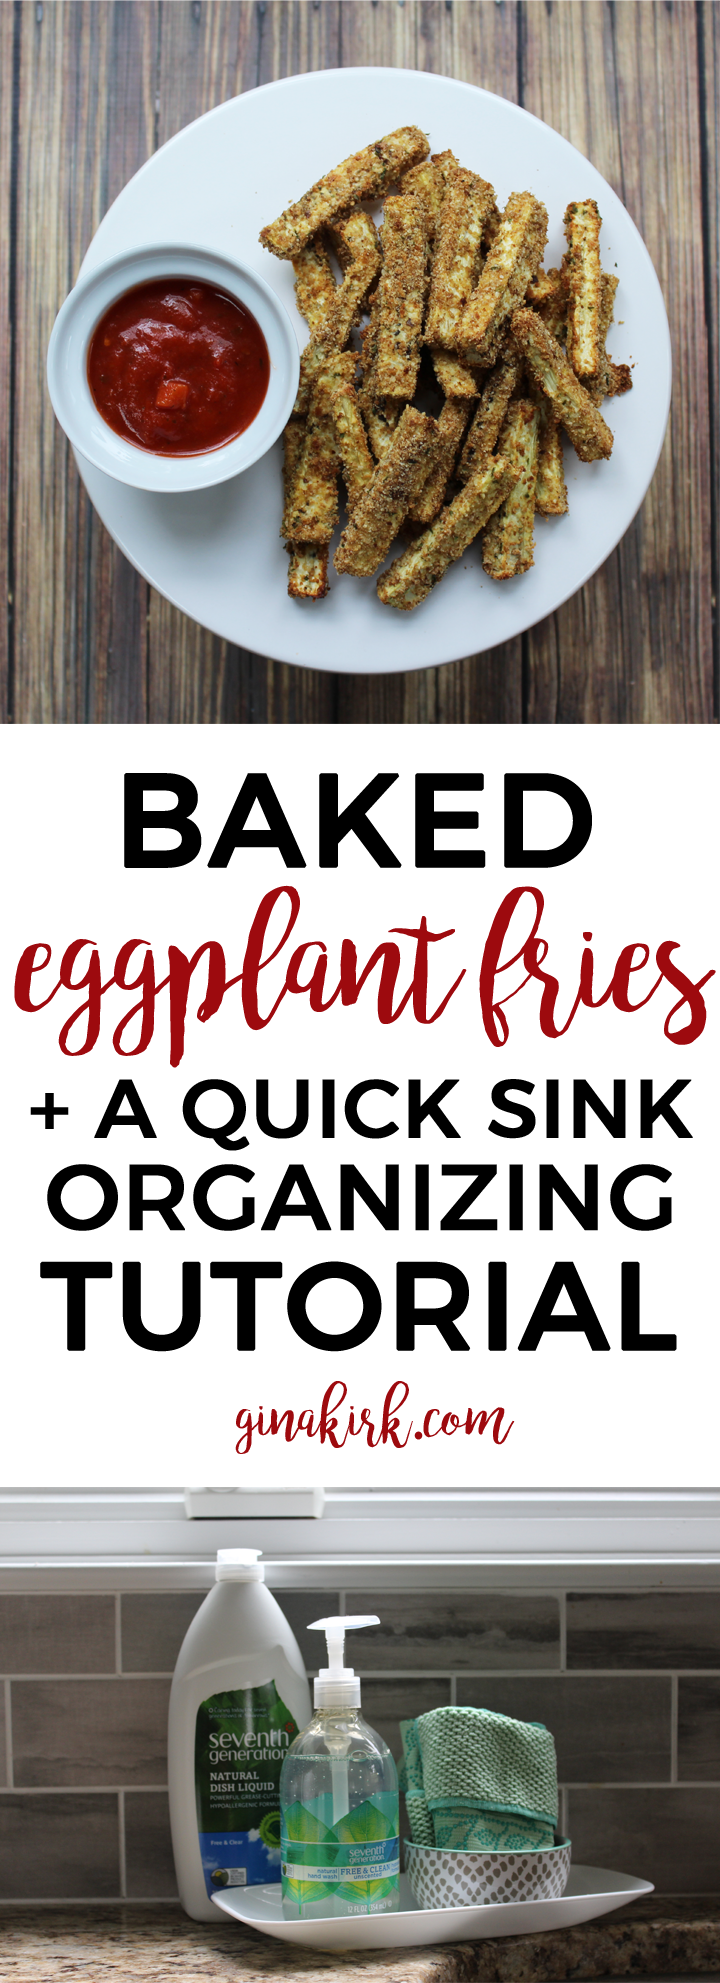 Eggplant fries recipe | How to make baked eggplant fries, a healthy alternative to french fries! Plus a quick sink station makeover with the help of Scotch-Brite scrubbing dish cloths! #collectivebias #scrubdishcloth #ad